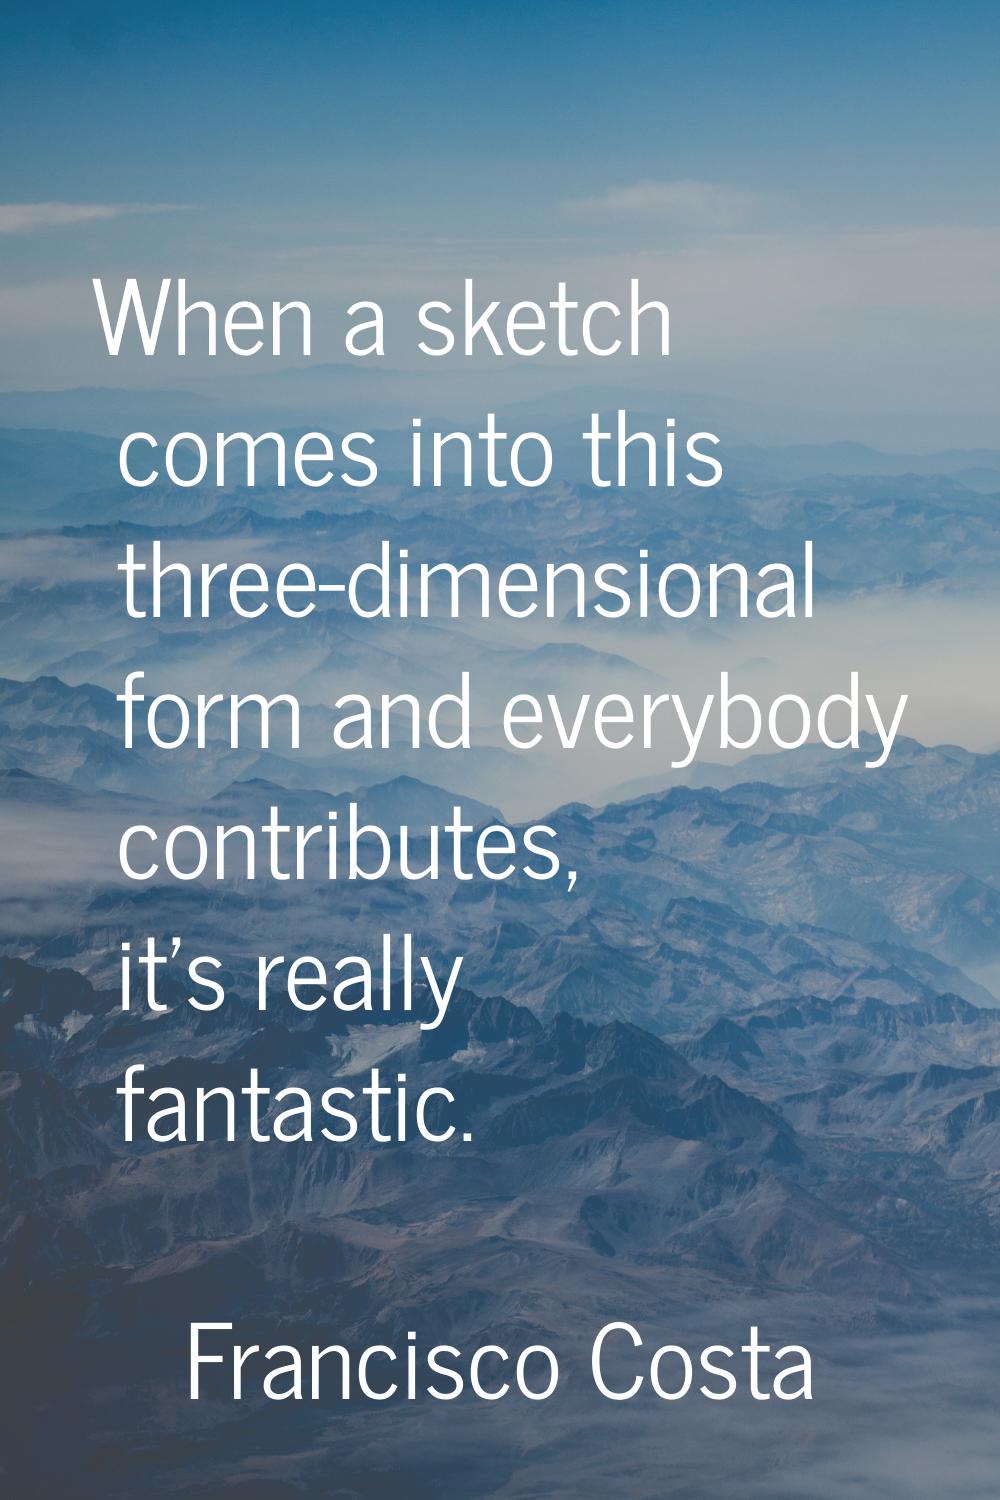 When a sketch comes into this three-dimensional form and everybody contributes, it's really fantast